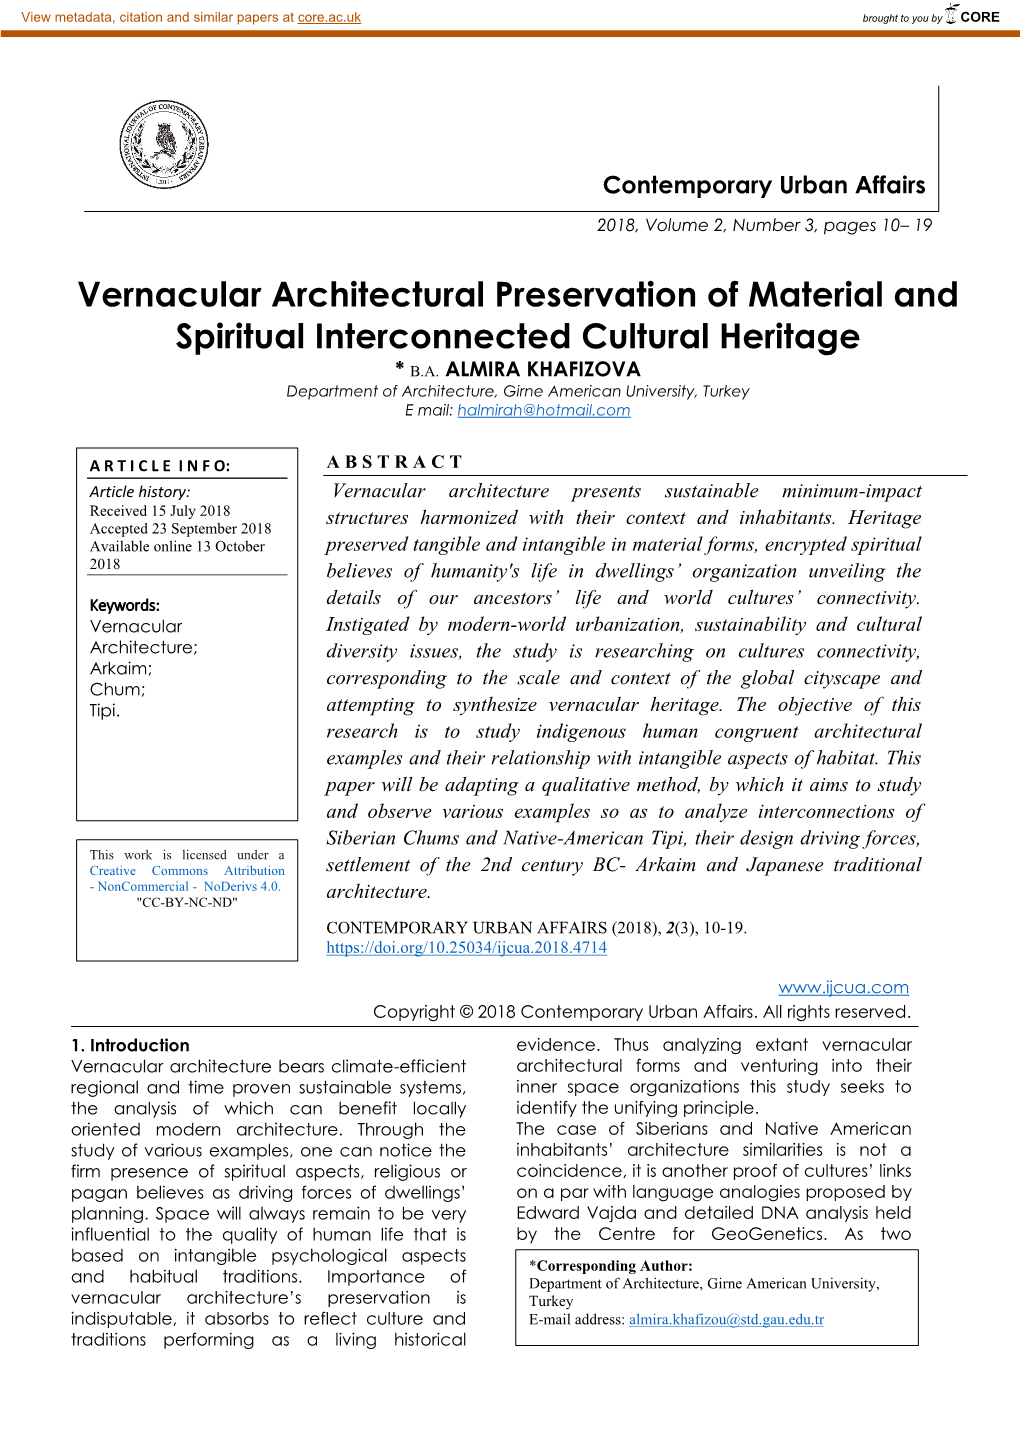 Vernacular Architectural Preservation of Material and Spiritual Interconnected Cultural Heritage * B.A